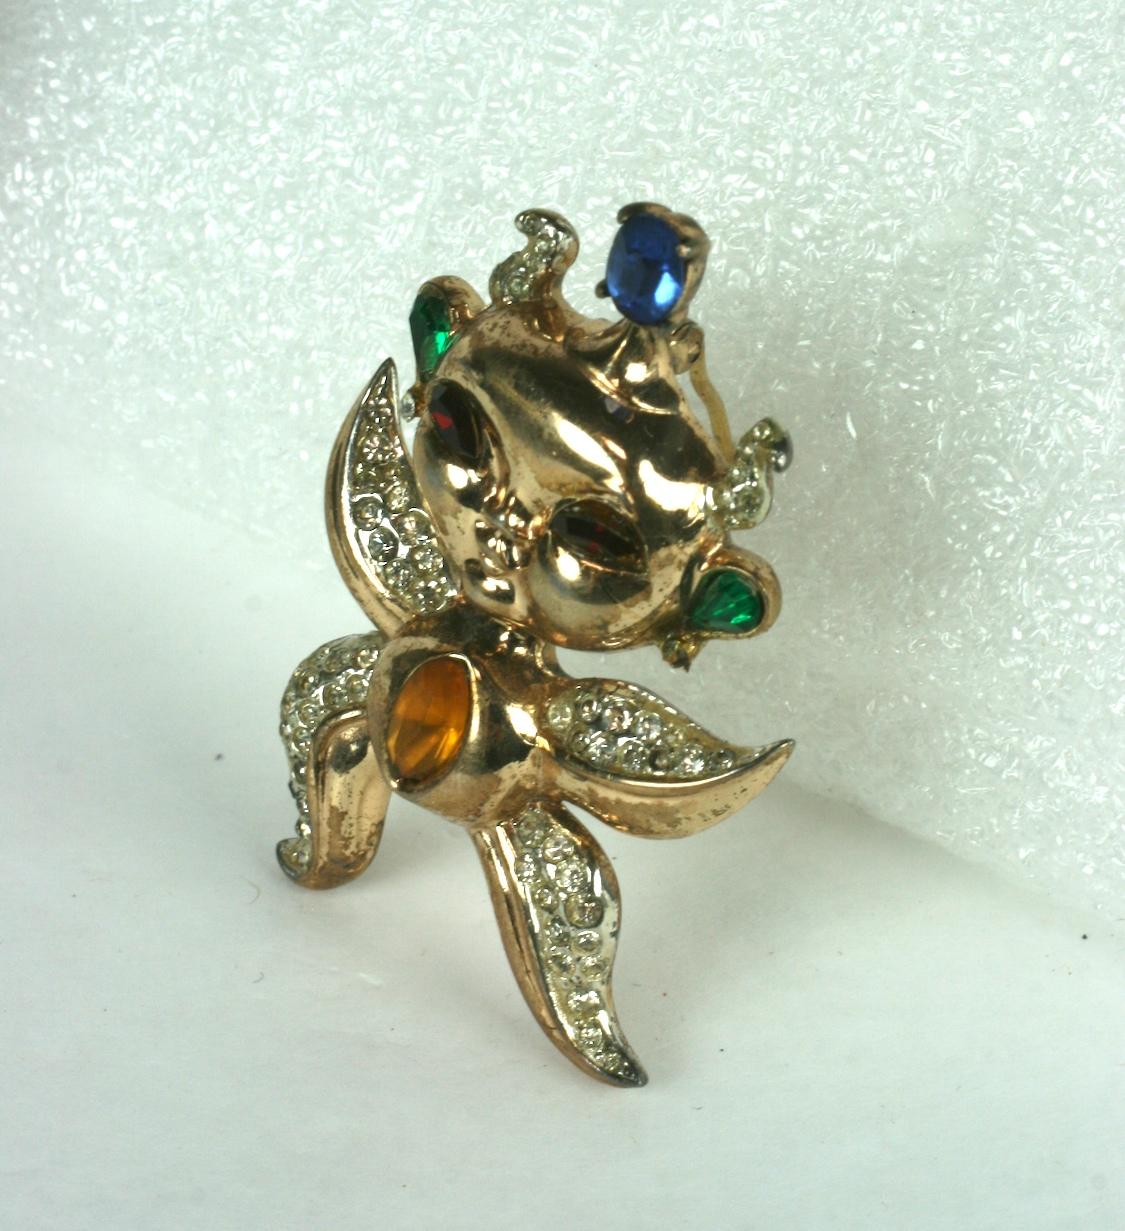 Charming Corocraft Sterling Vermeil Pixie Brooch from the 1940's. Adorable pixie alien with starfish like body decorated with pave accents and colored crystals. High quality casting in sterling with gold wash.
Very good condition.  2.25